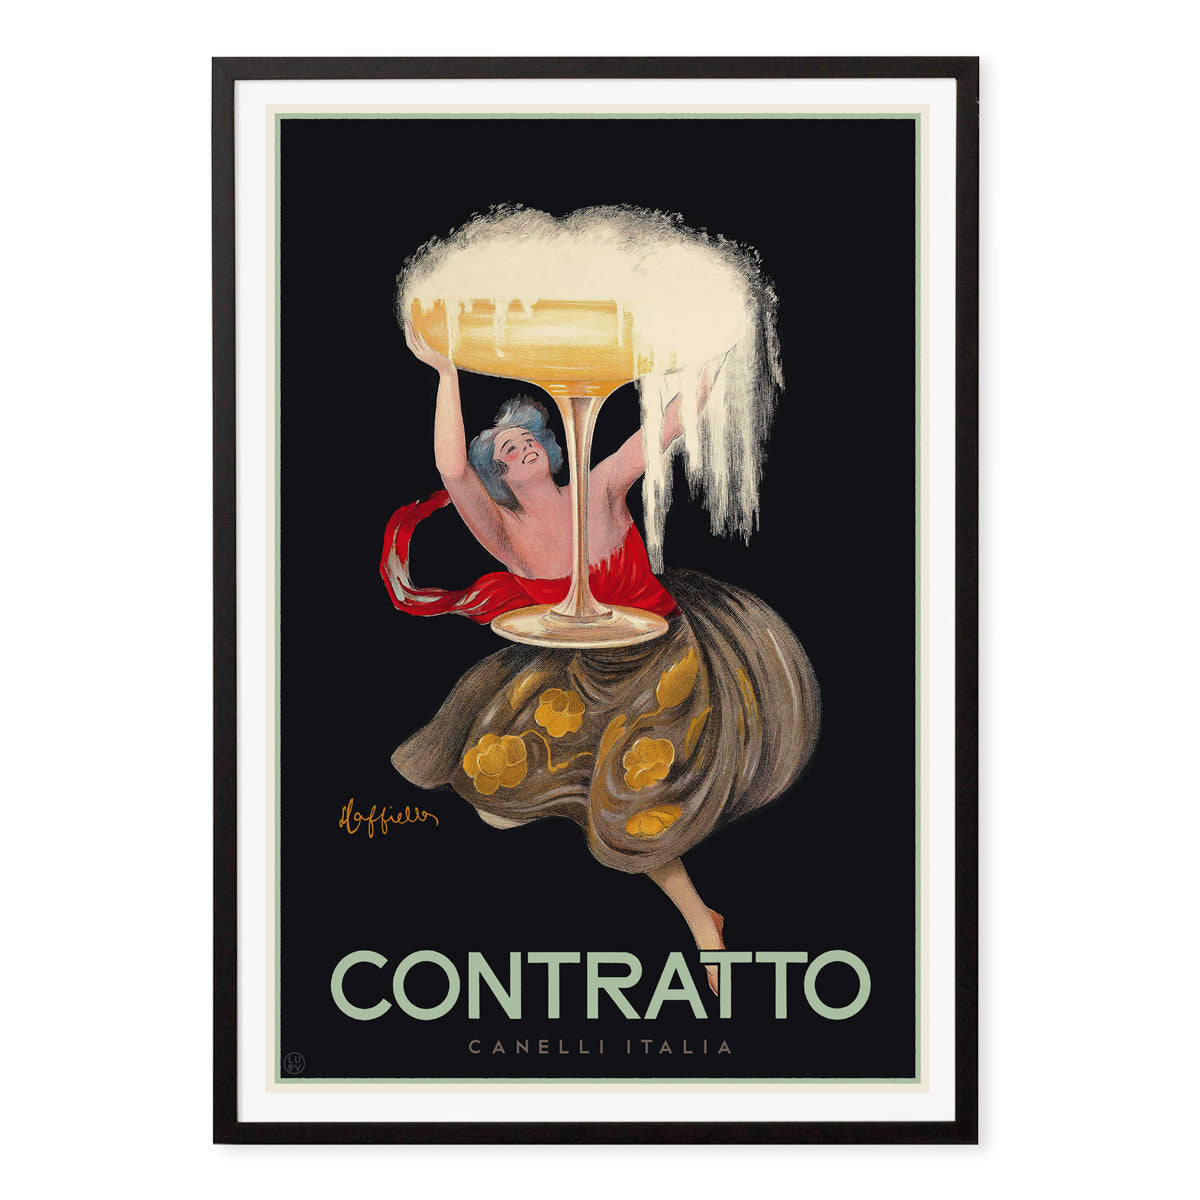 Contratto Italy retro vintage advertising poster in black frame - Places We Luv